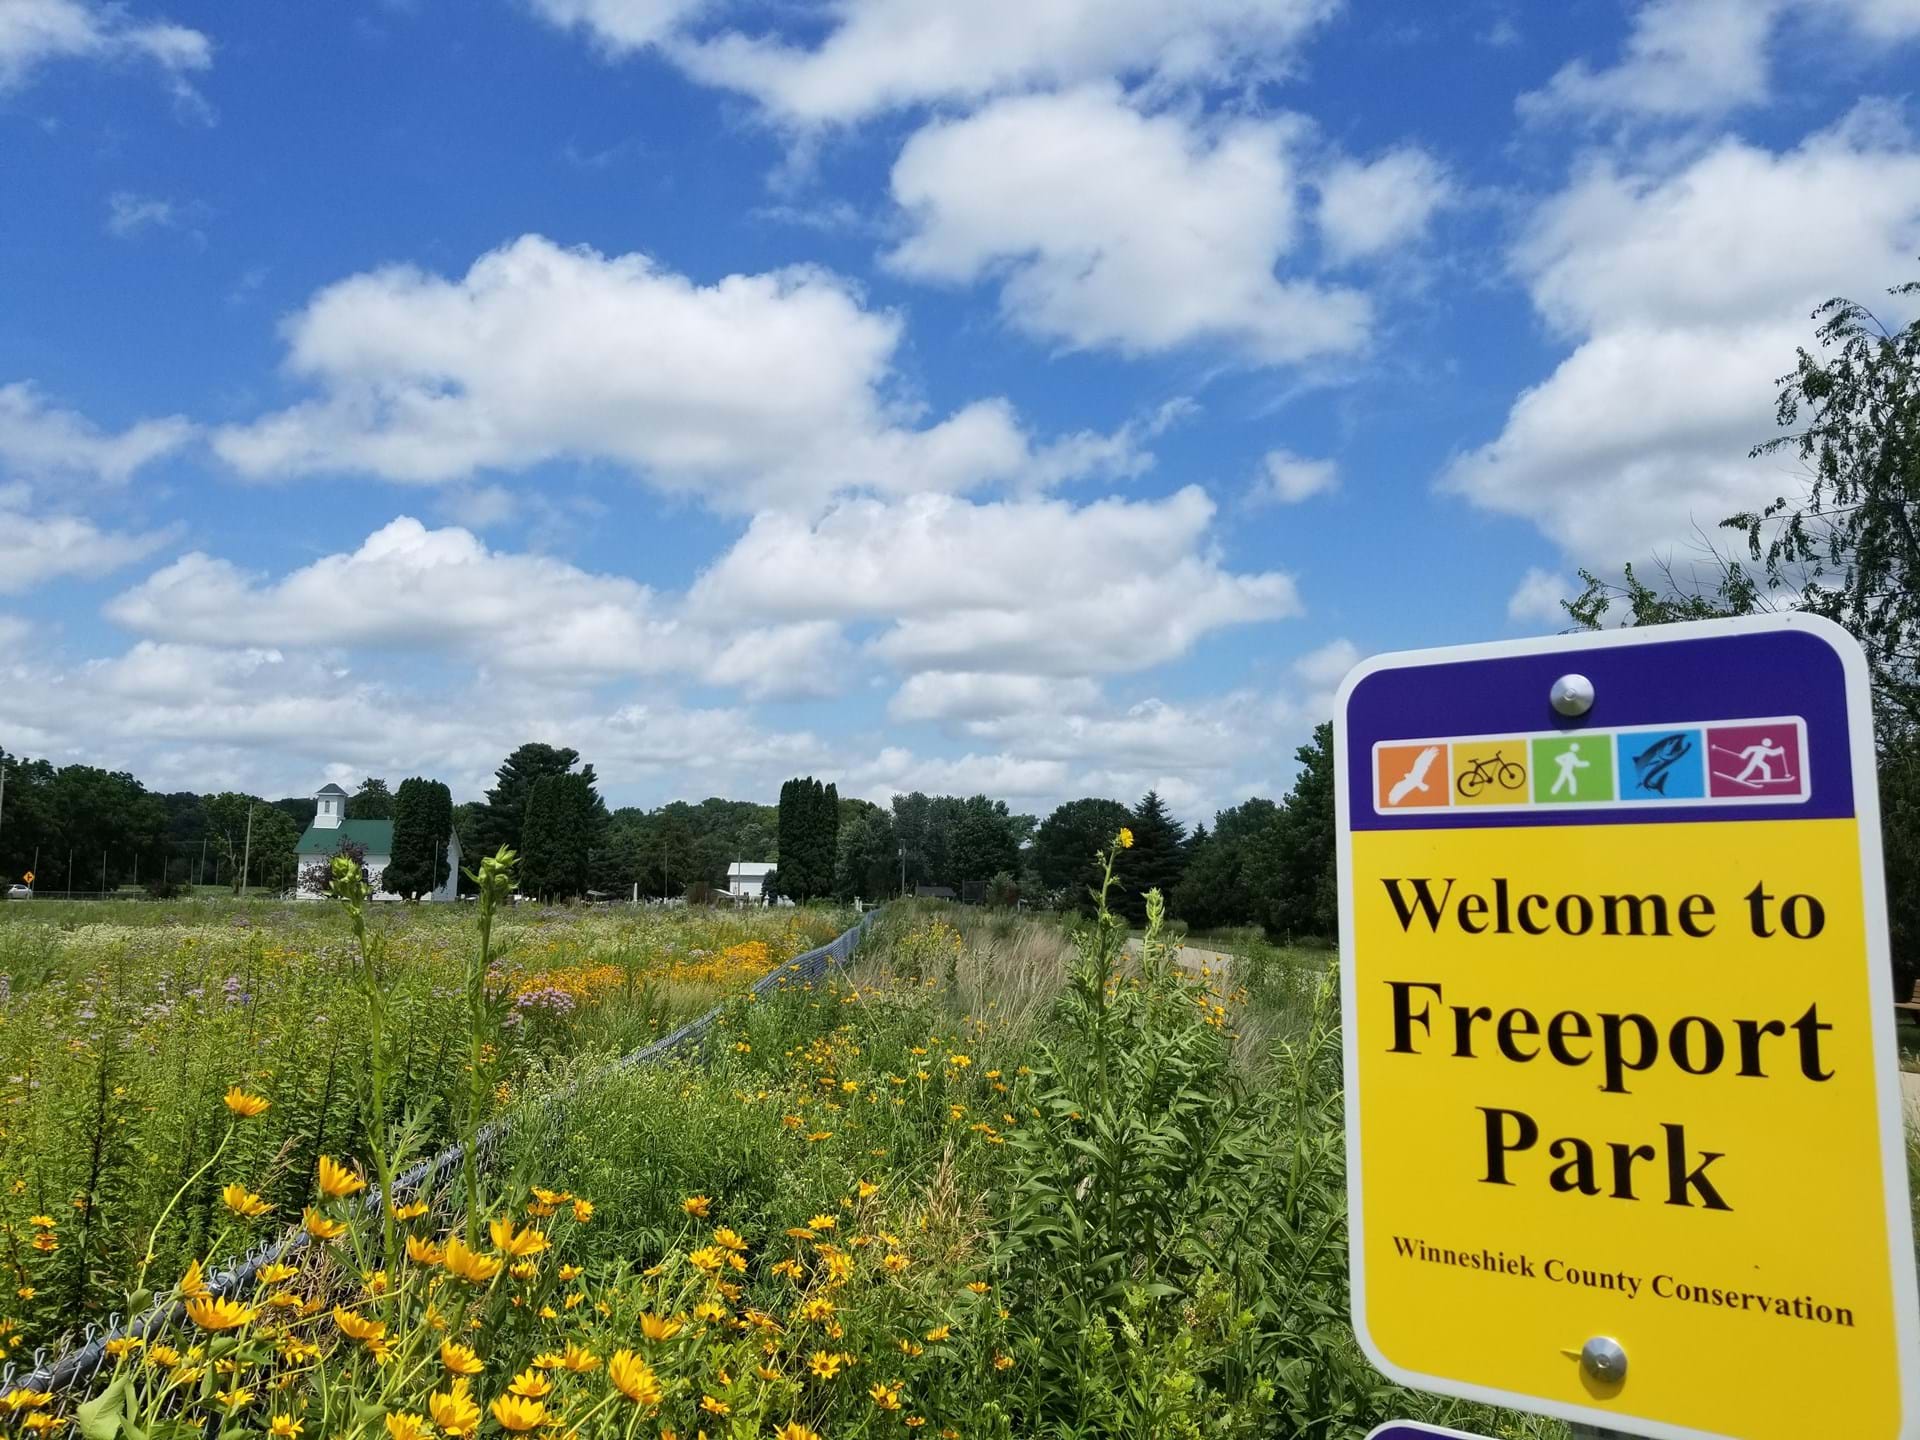 The sign welcoming you to Freeport Park, overlook a fieel of wildflowers and grasses